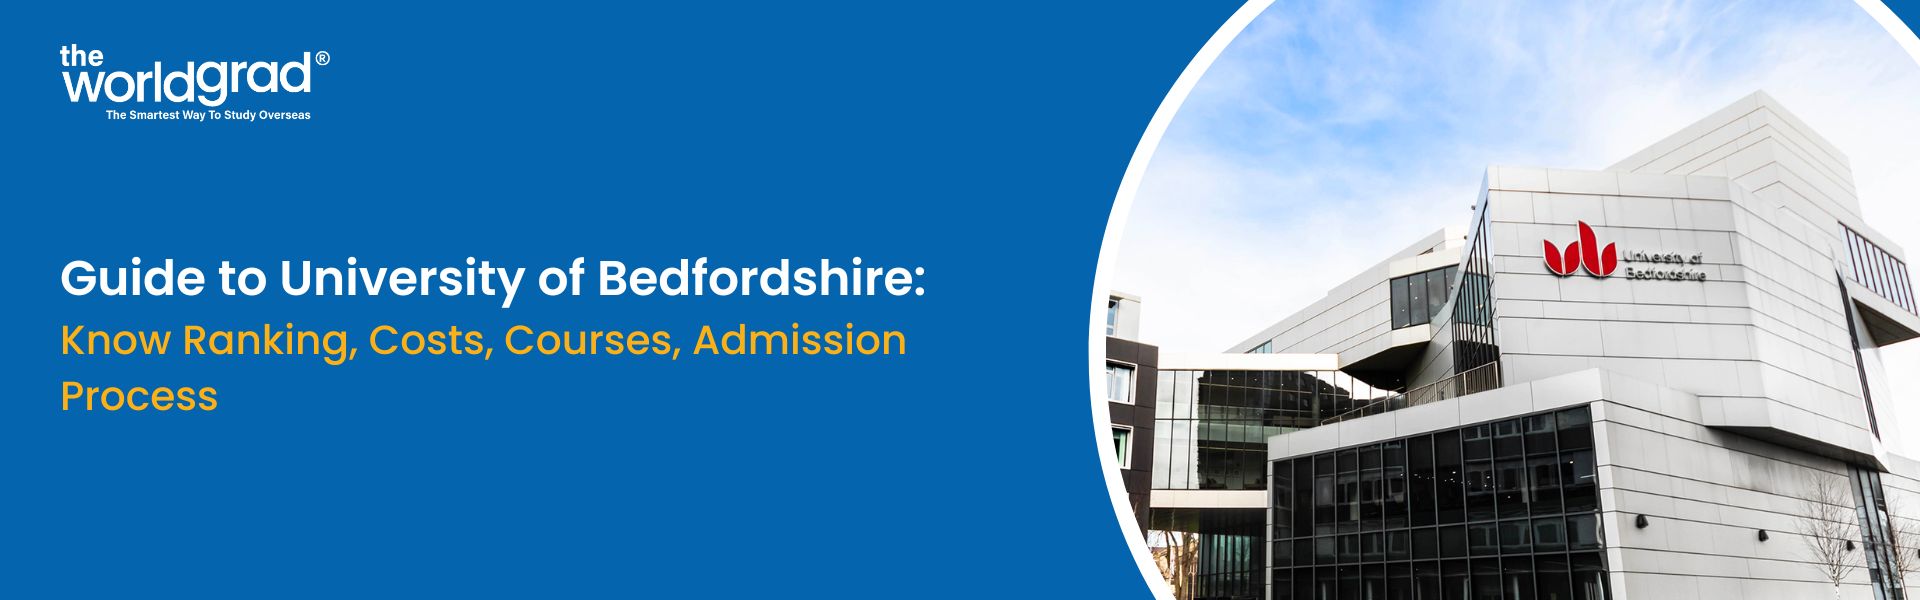 University of Bedfordshire Admission Guide: Know Ranking, Costs, Courses, and Admission Process